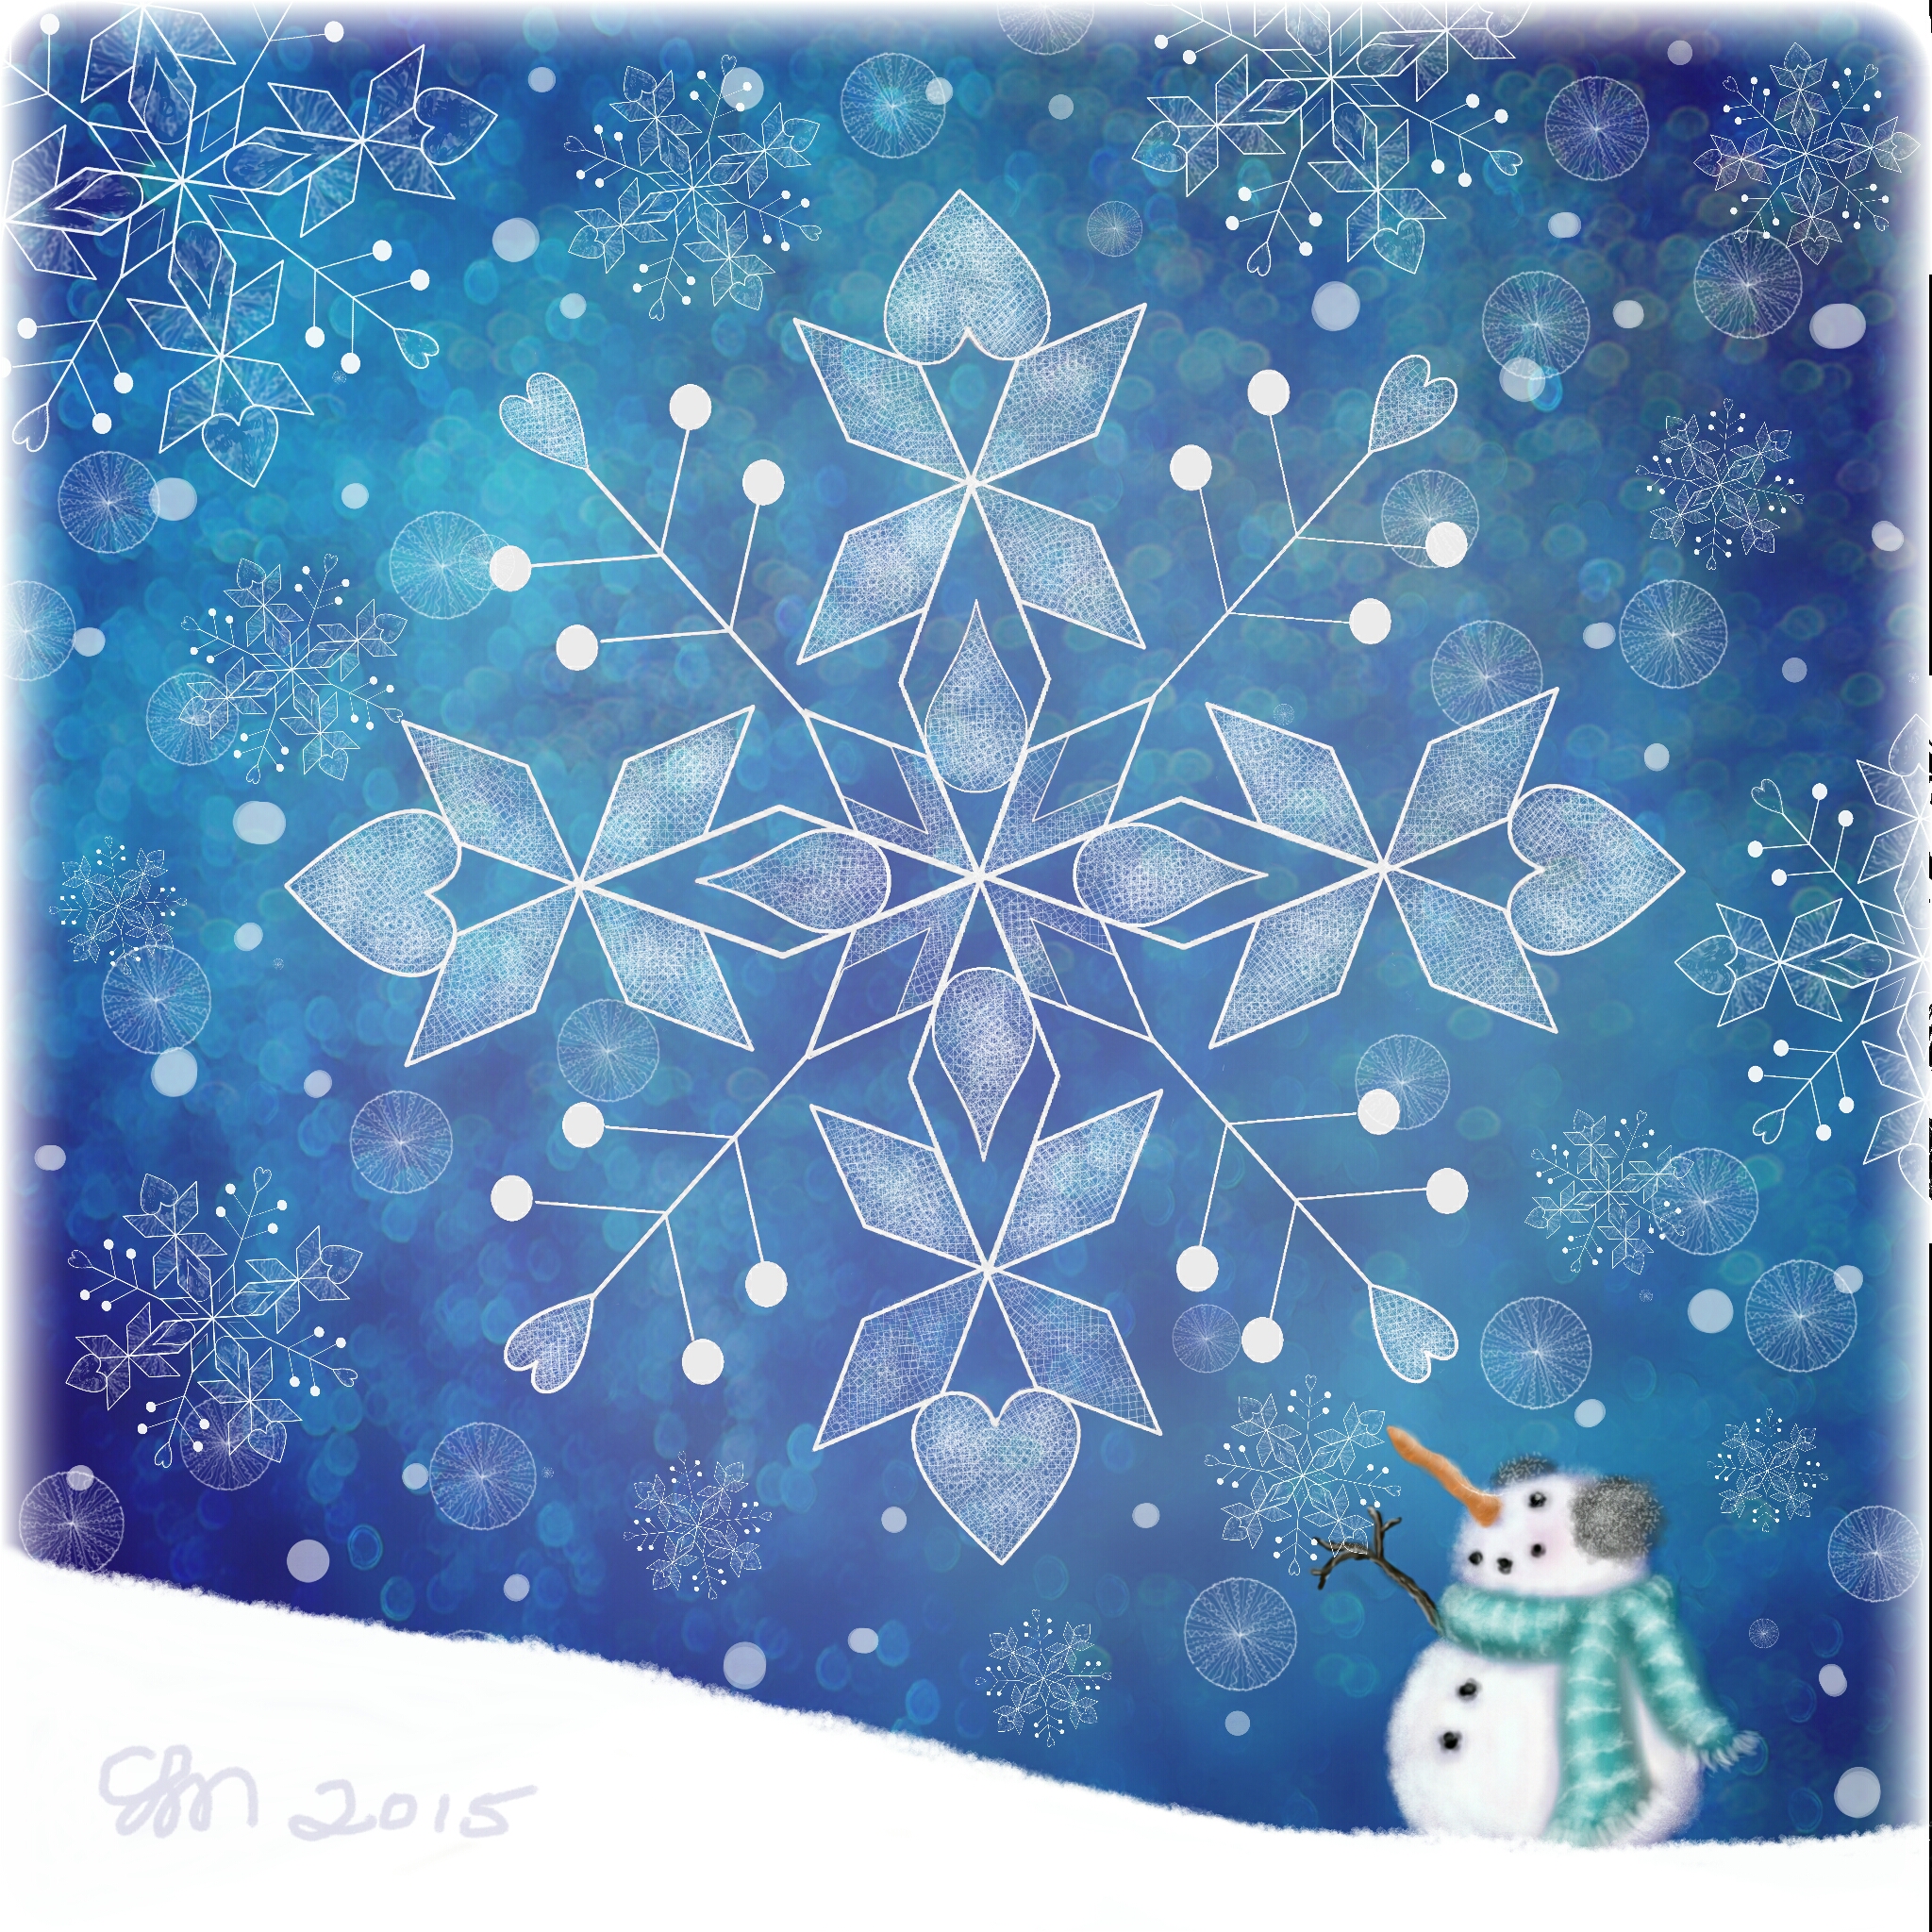 dcsnowflake winter colorful snow drawing...